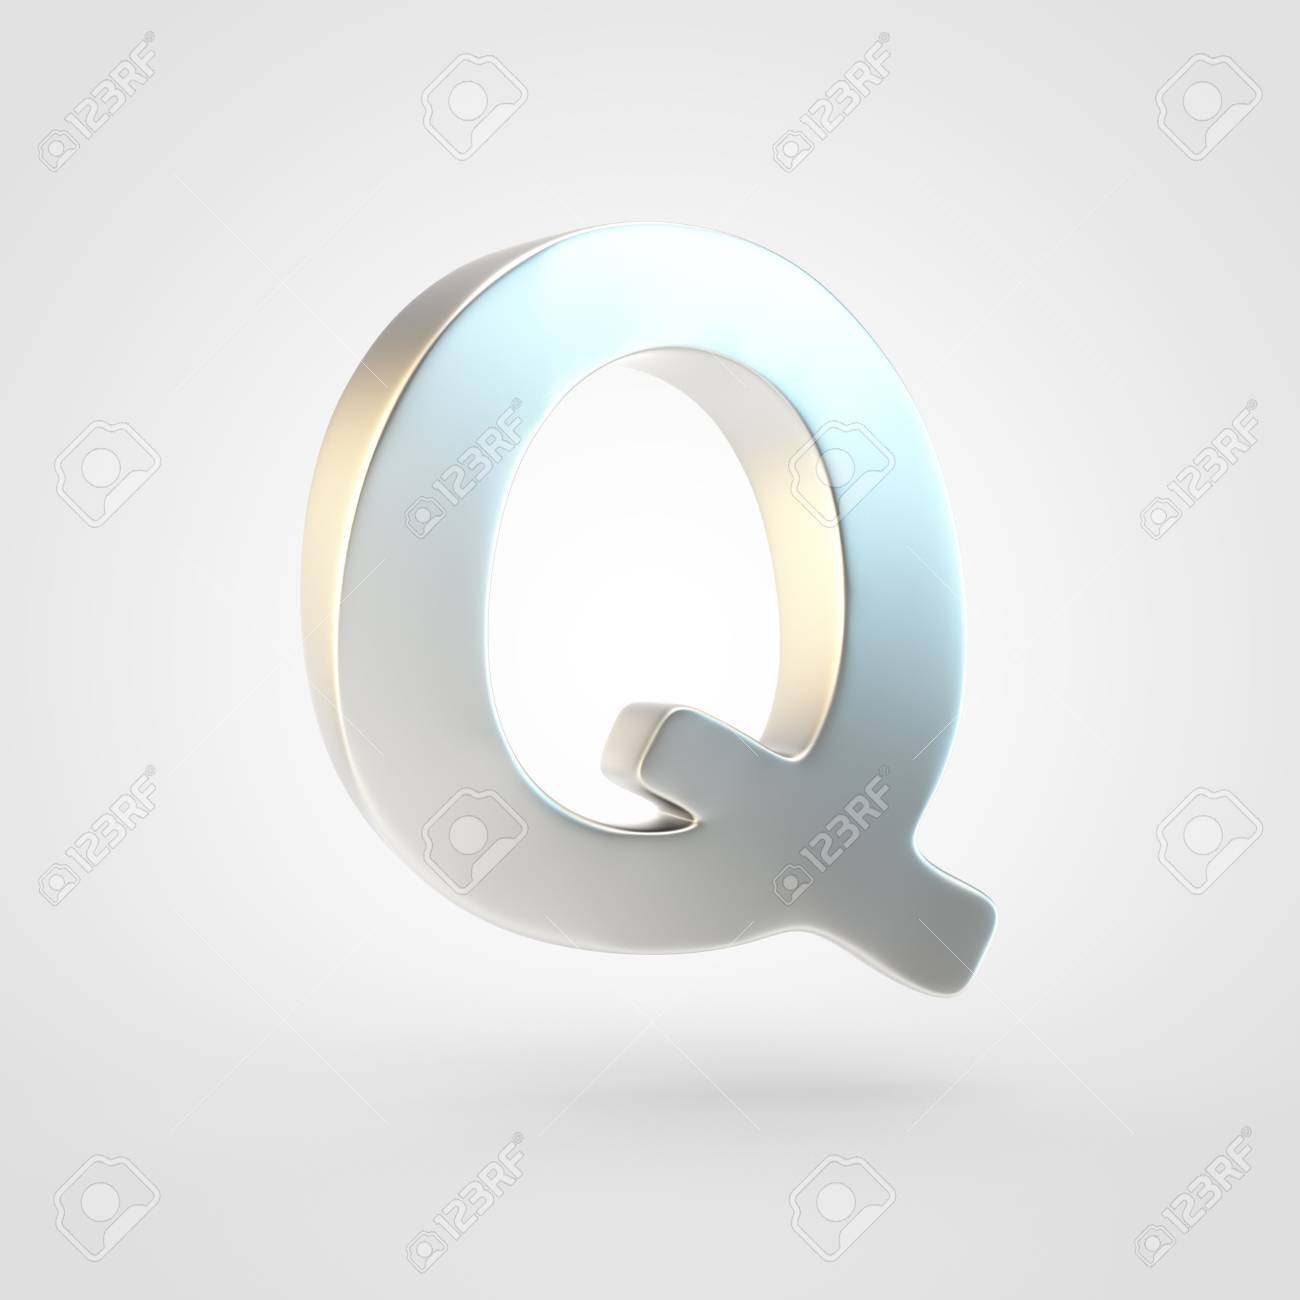 Silver Letter Q Uppercase 3d Rendering Of Matted Font